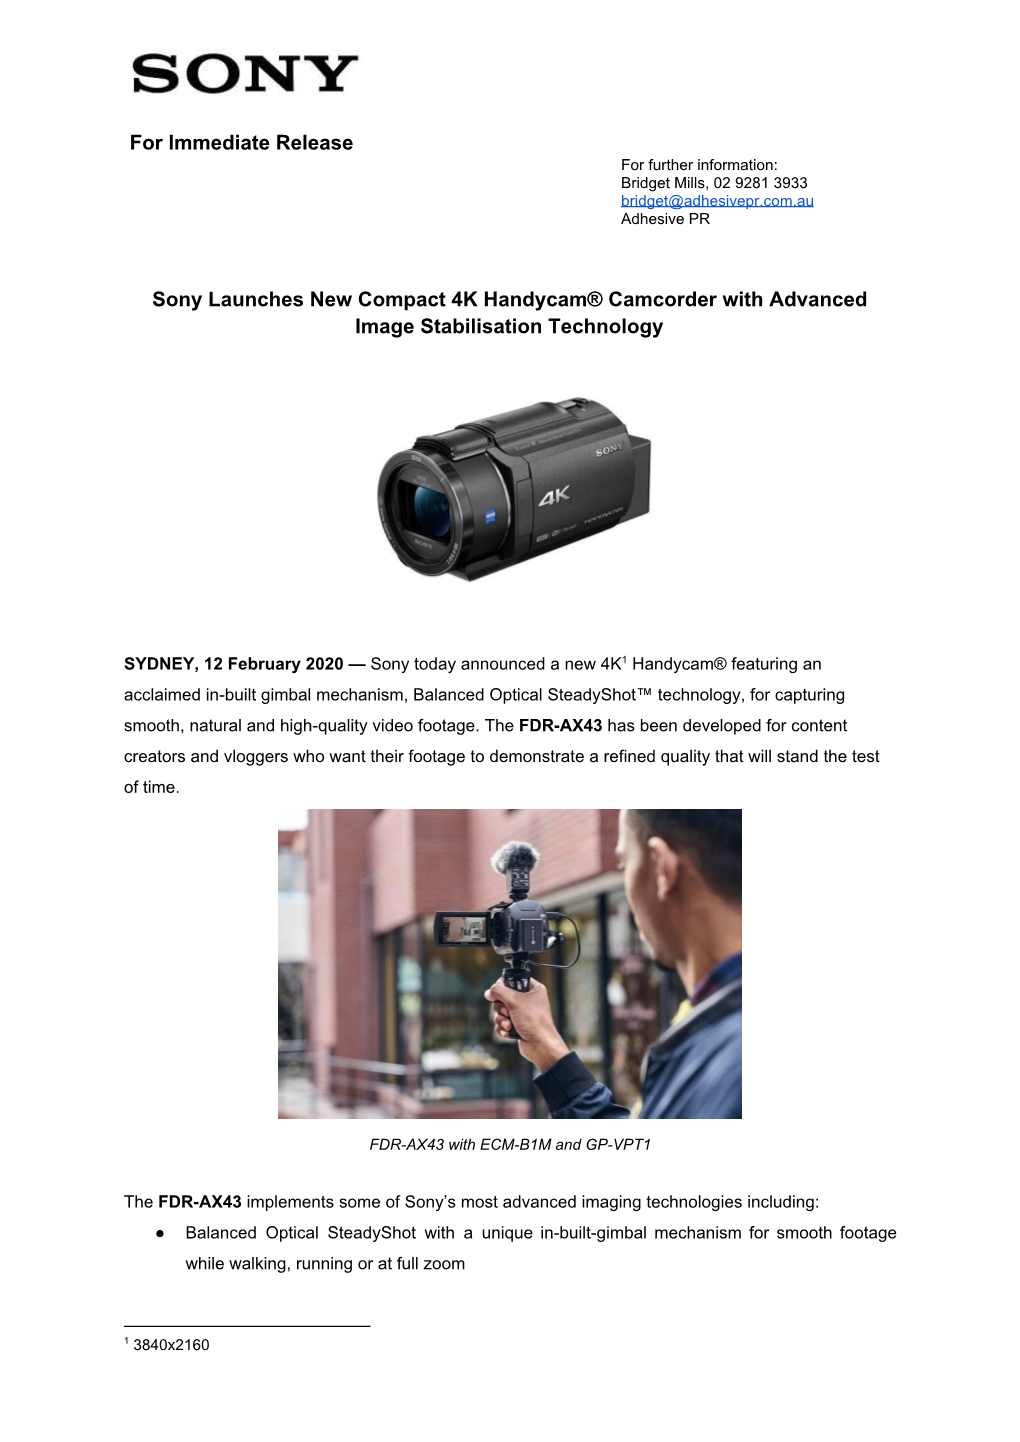 Sony Launches New Compact 4K Handycam® Camcorder with Advanced Image Stabilisation Technology